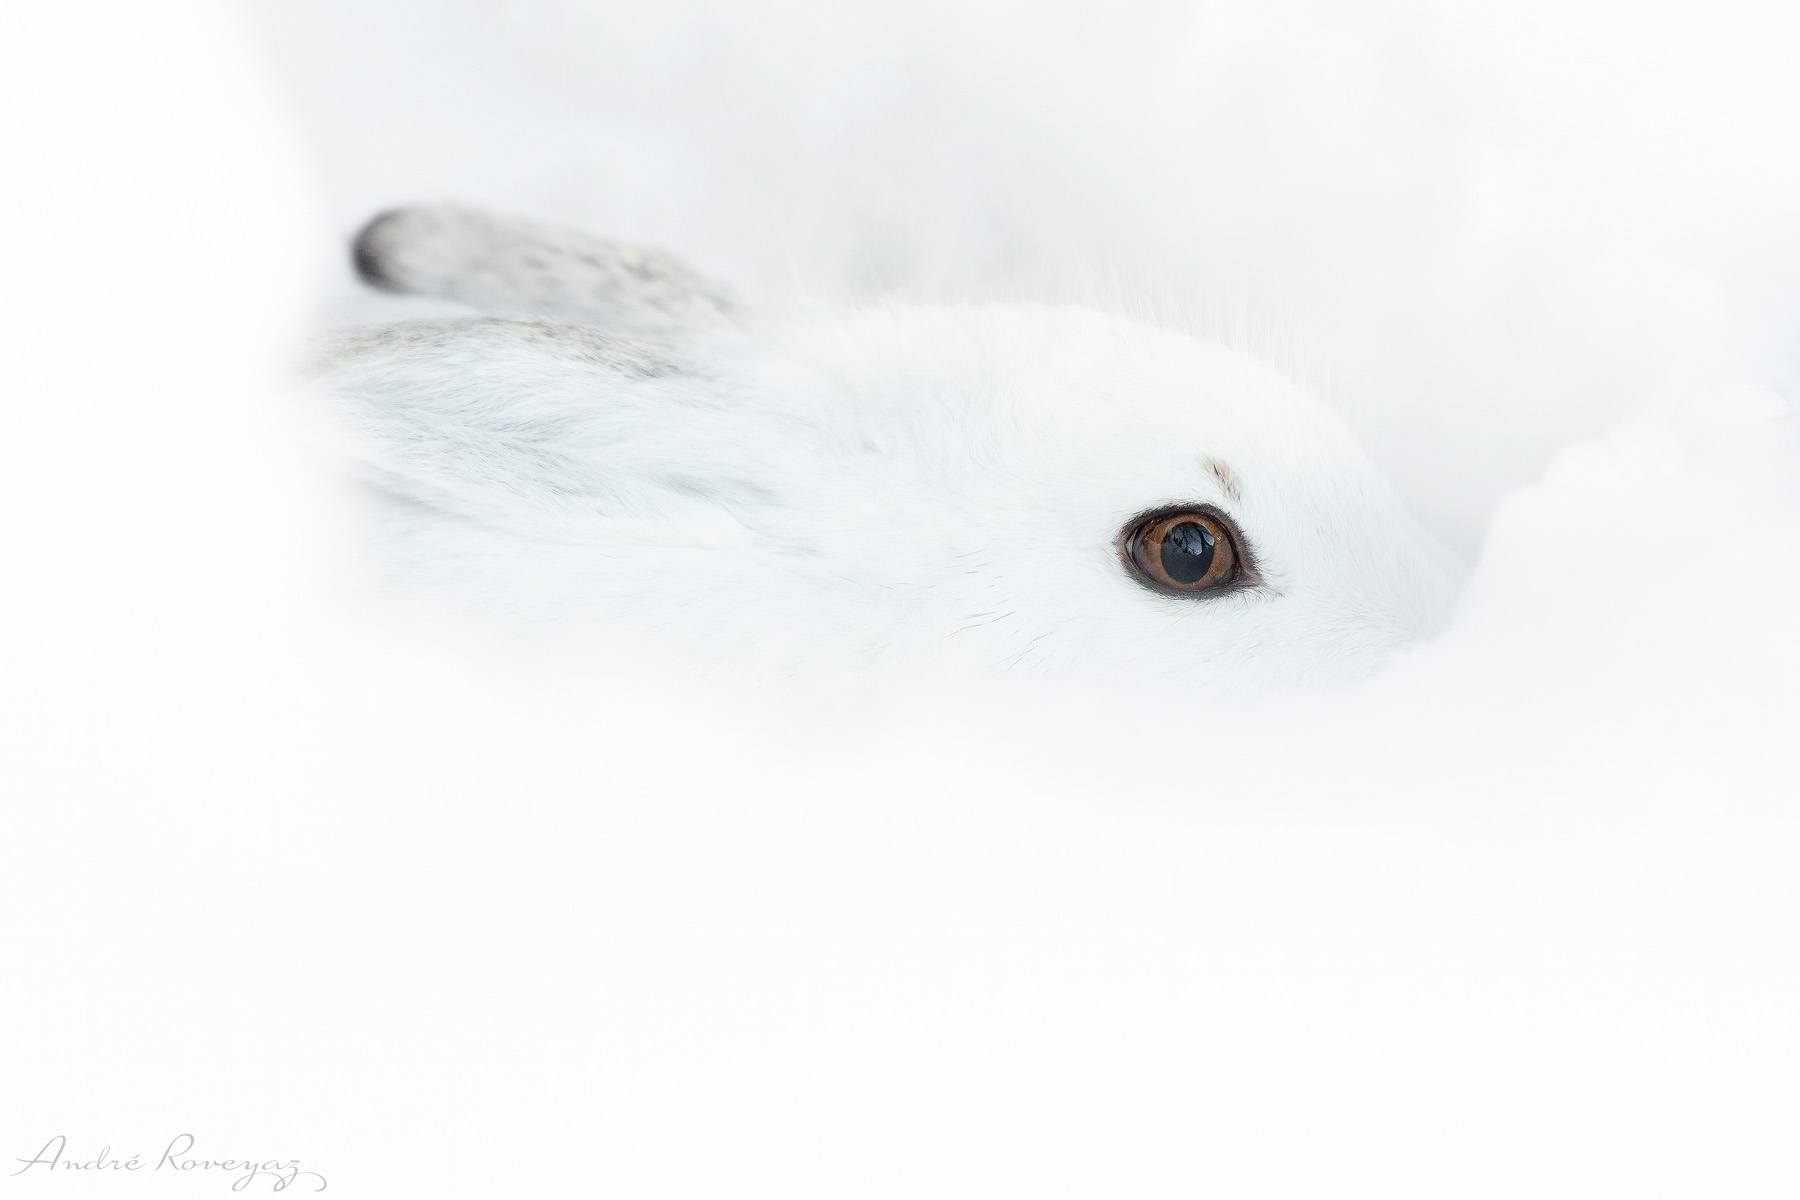 The eyes of the snow...